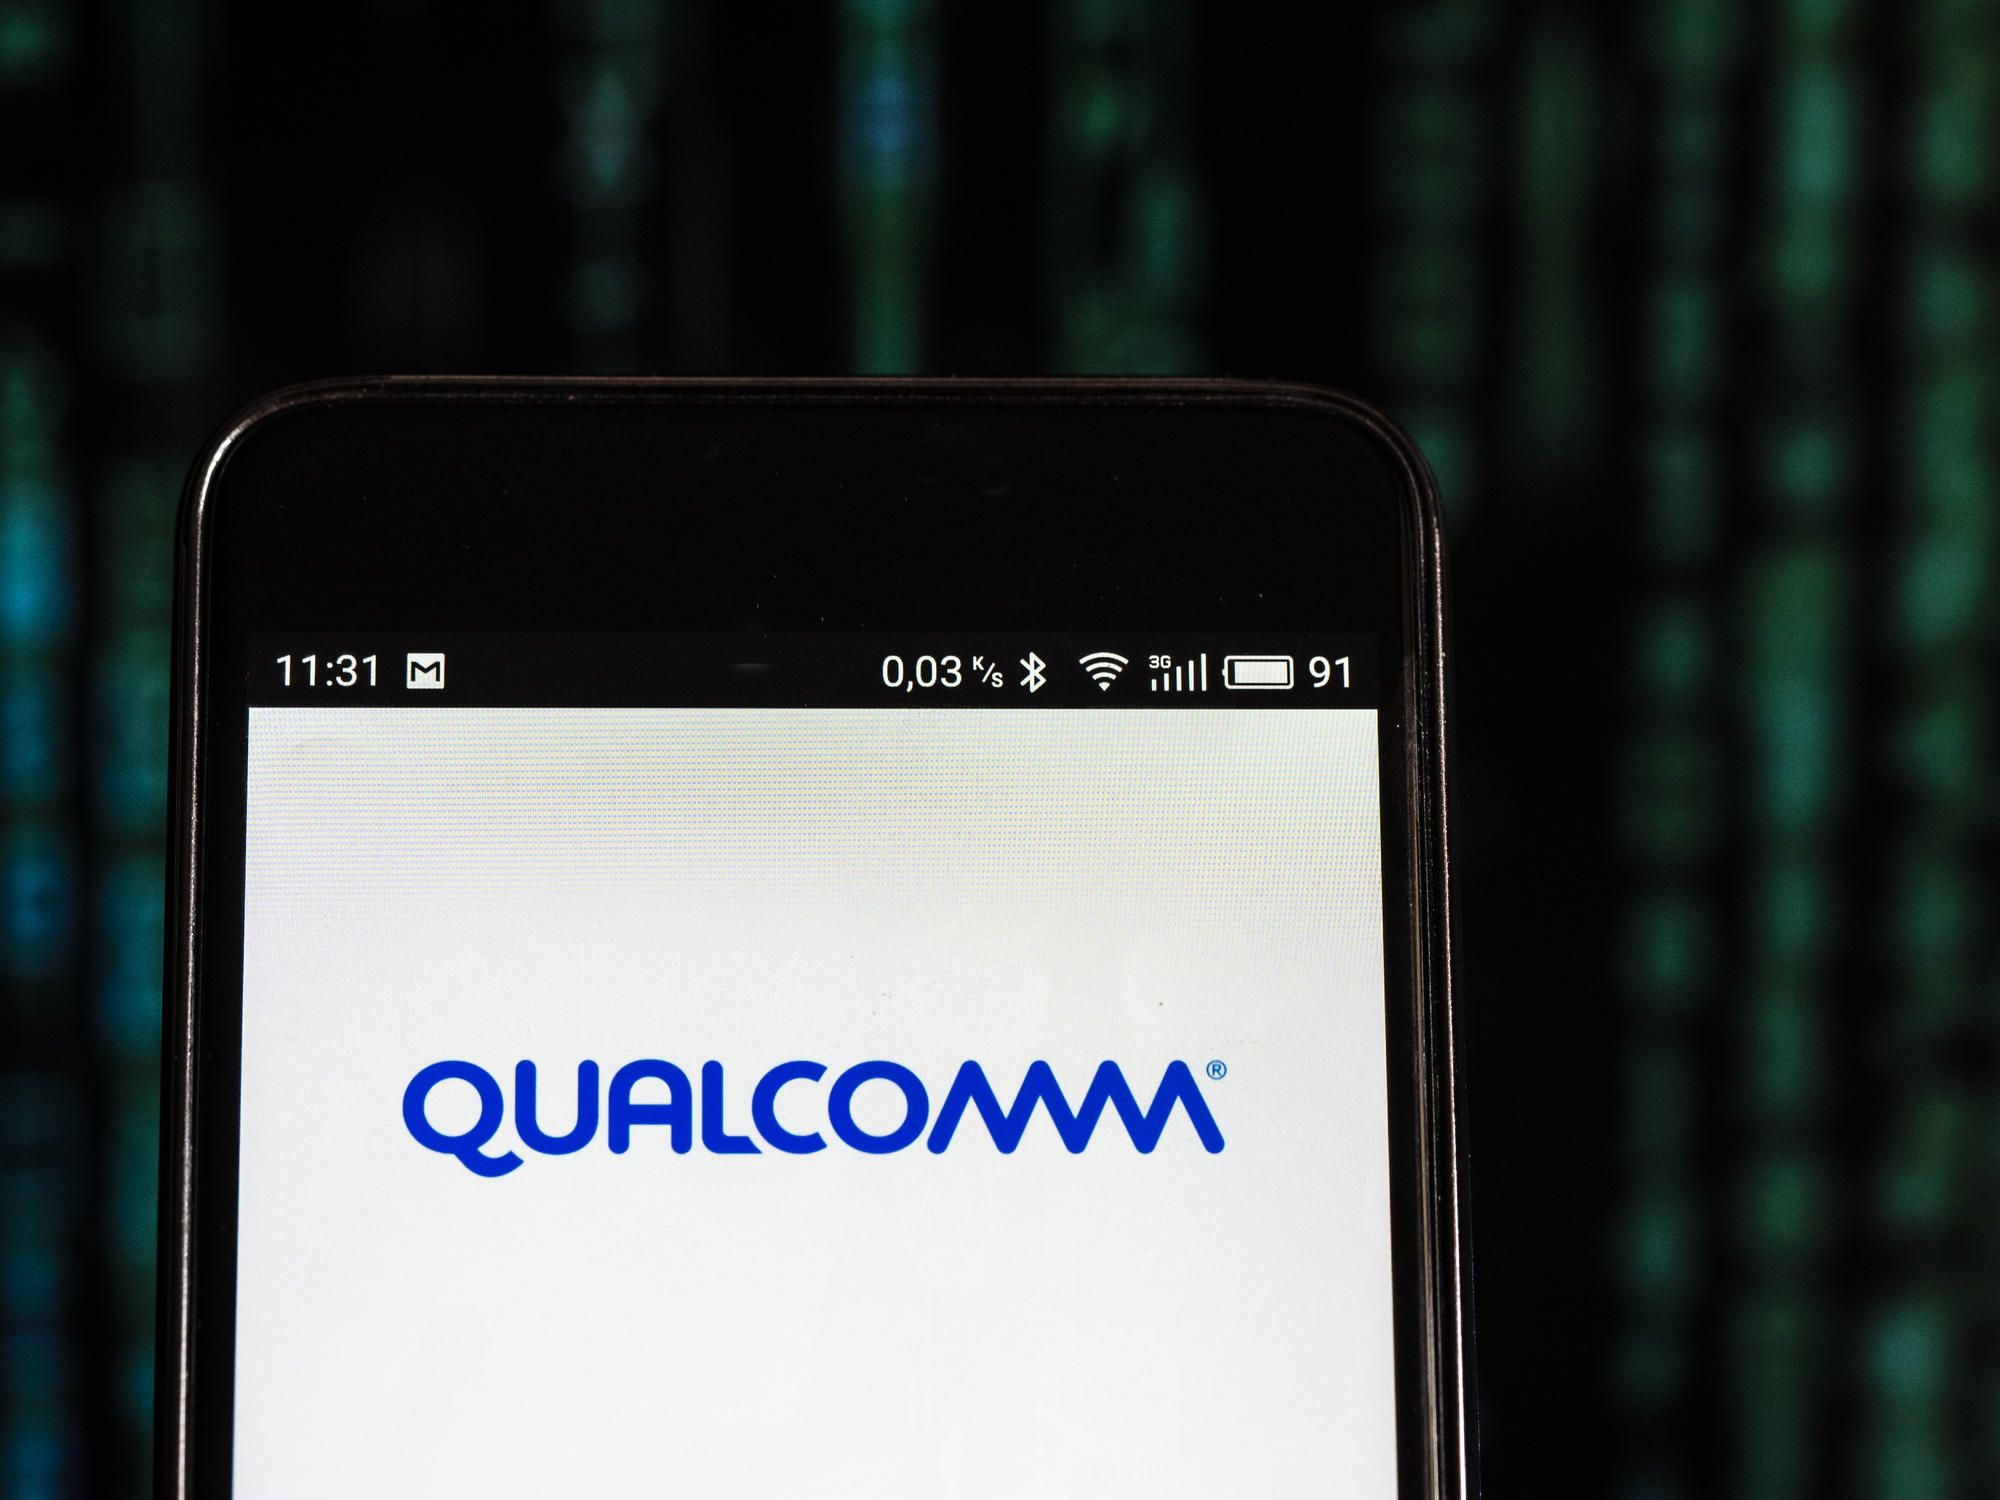 Qualcomm Class Action Seeks Certification Appeal - Top Class Actions